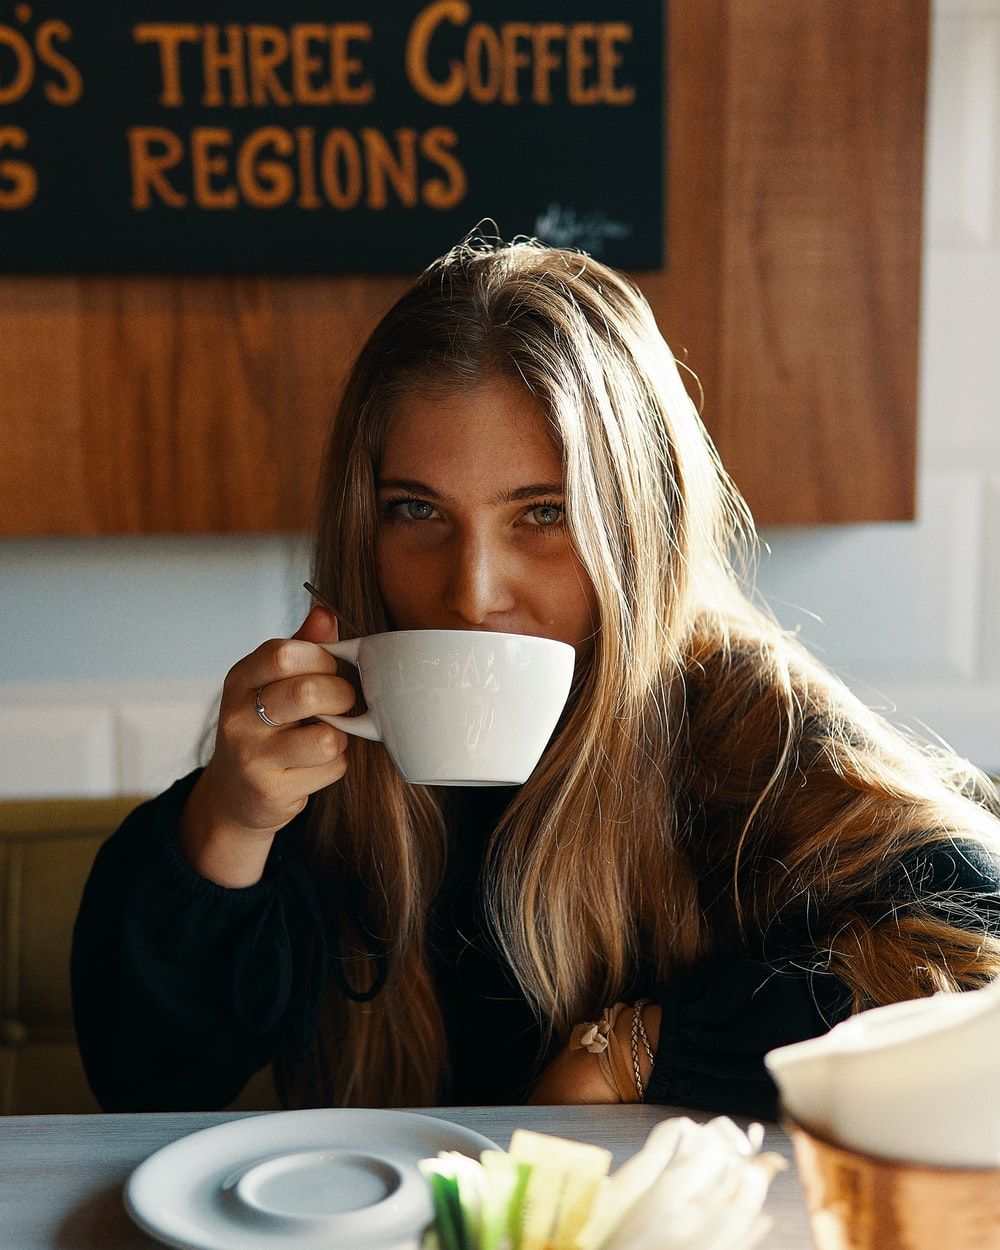 Woman Coffee Picture. Download Free Image